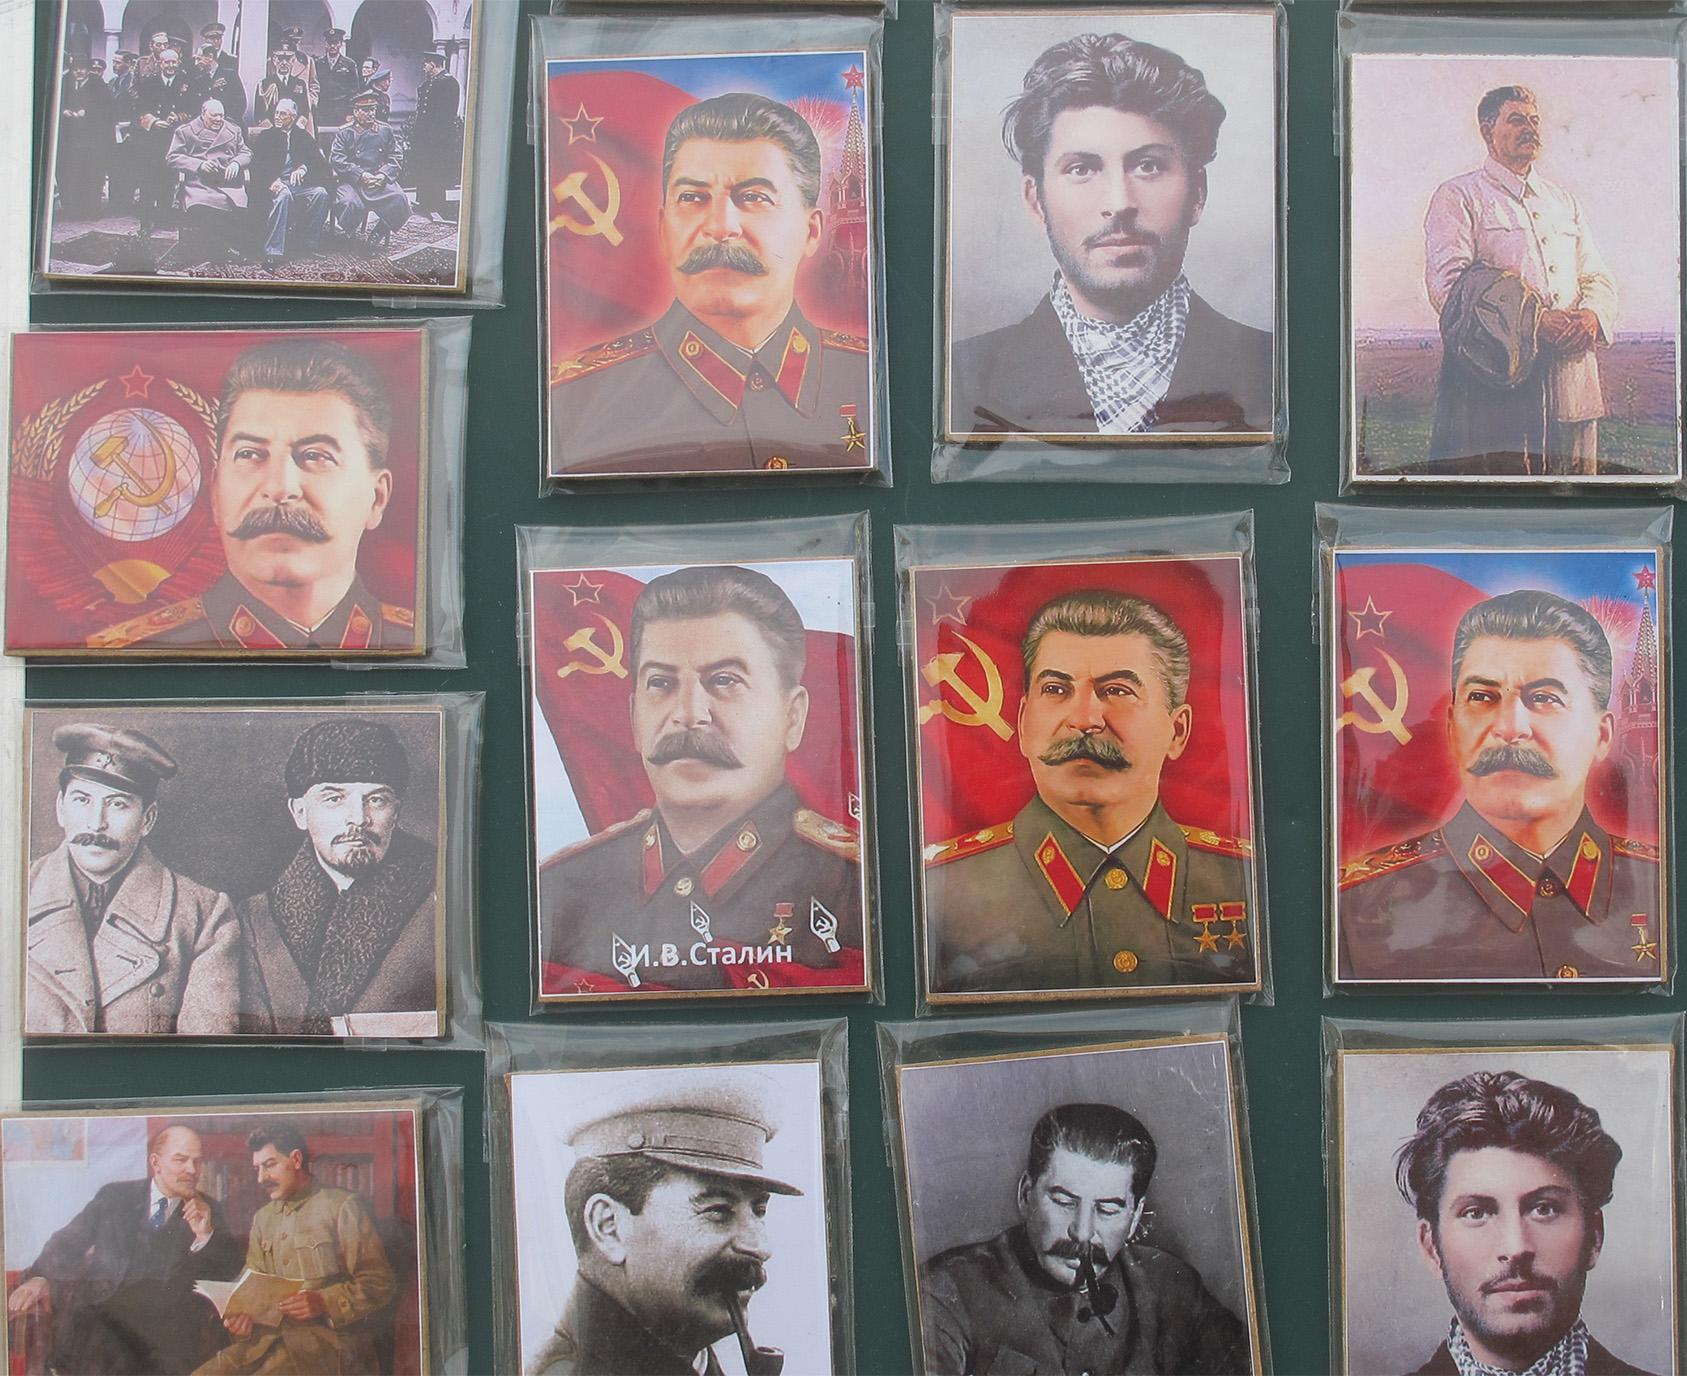 Stalin refrigerator magnets for sale outside the Stalin Museum in Gori, Georgia